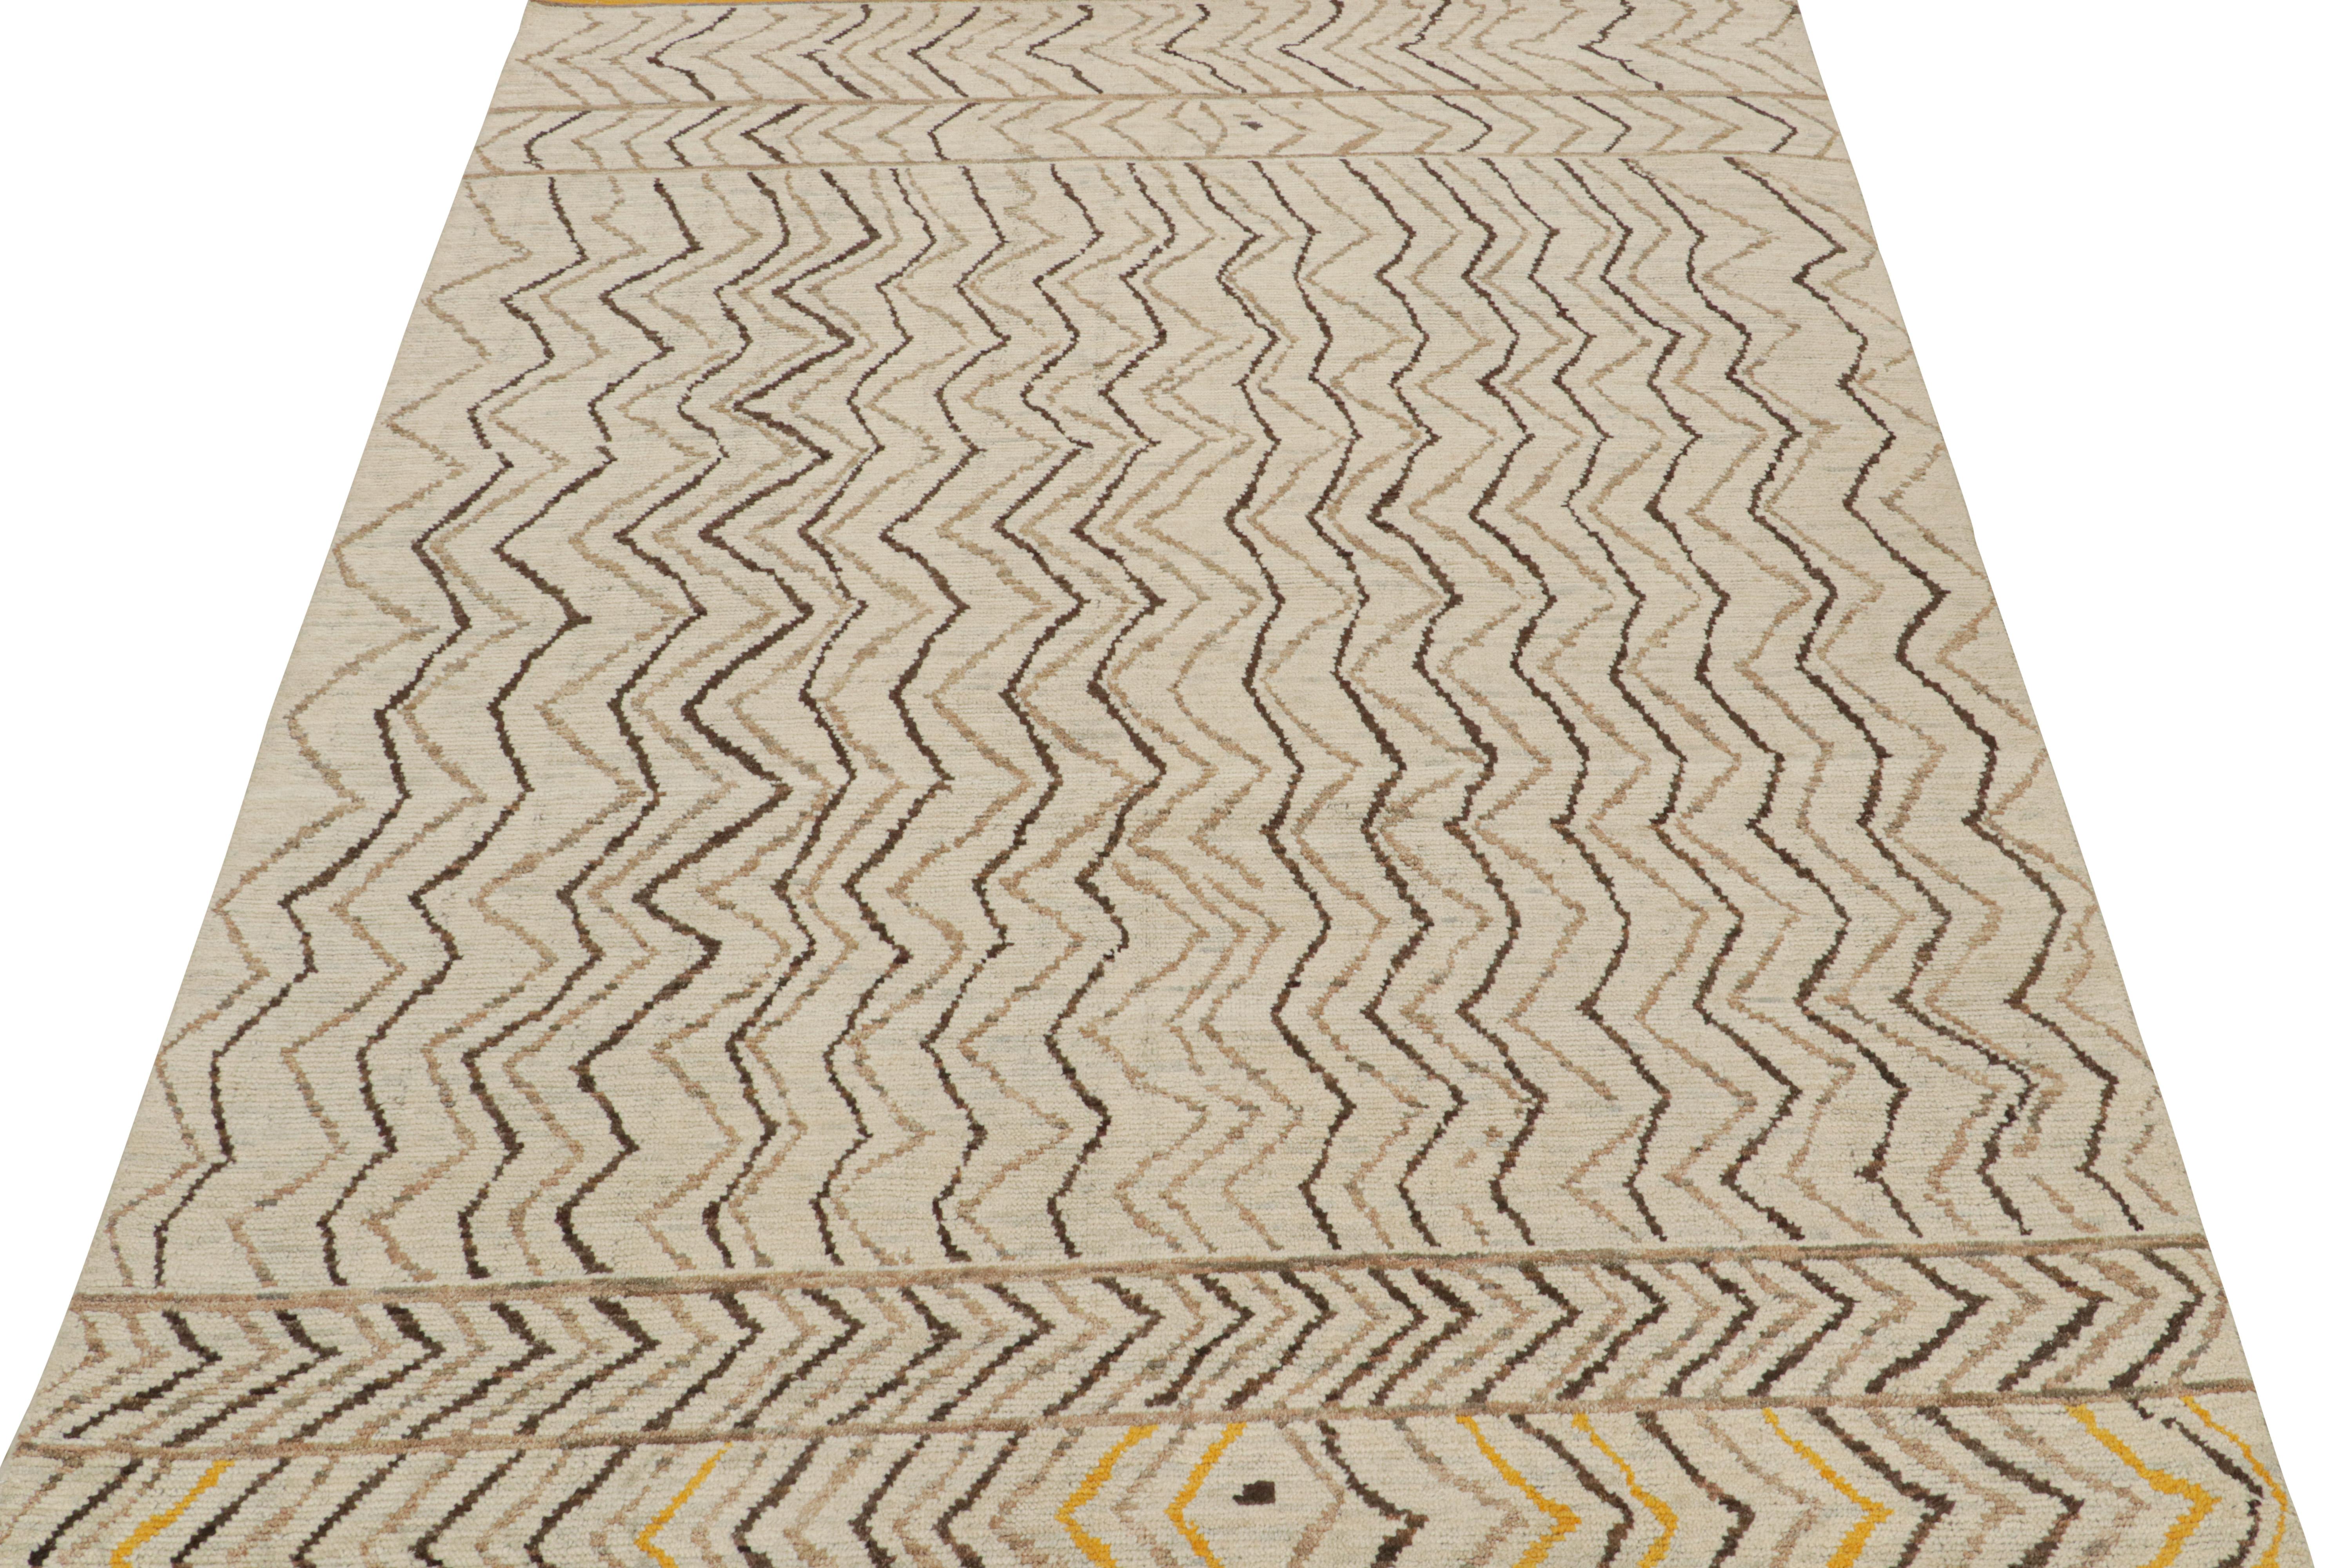 This 9x12 rug is a new addition to Rug & Kilim’s Moroccan rug collection. Hand-knotted in wool, its design recaptures the classic tribal sensibility in a new modern quality.

This particular design enjoys stripes and geometric patterns, and an